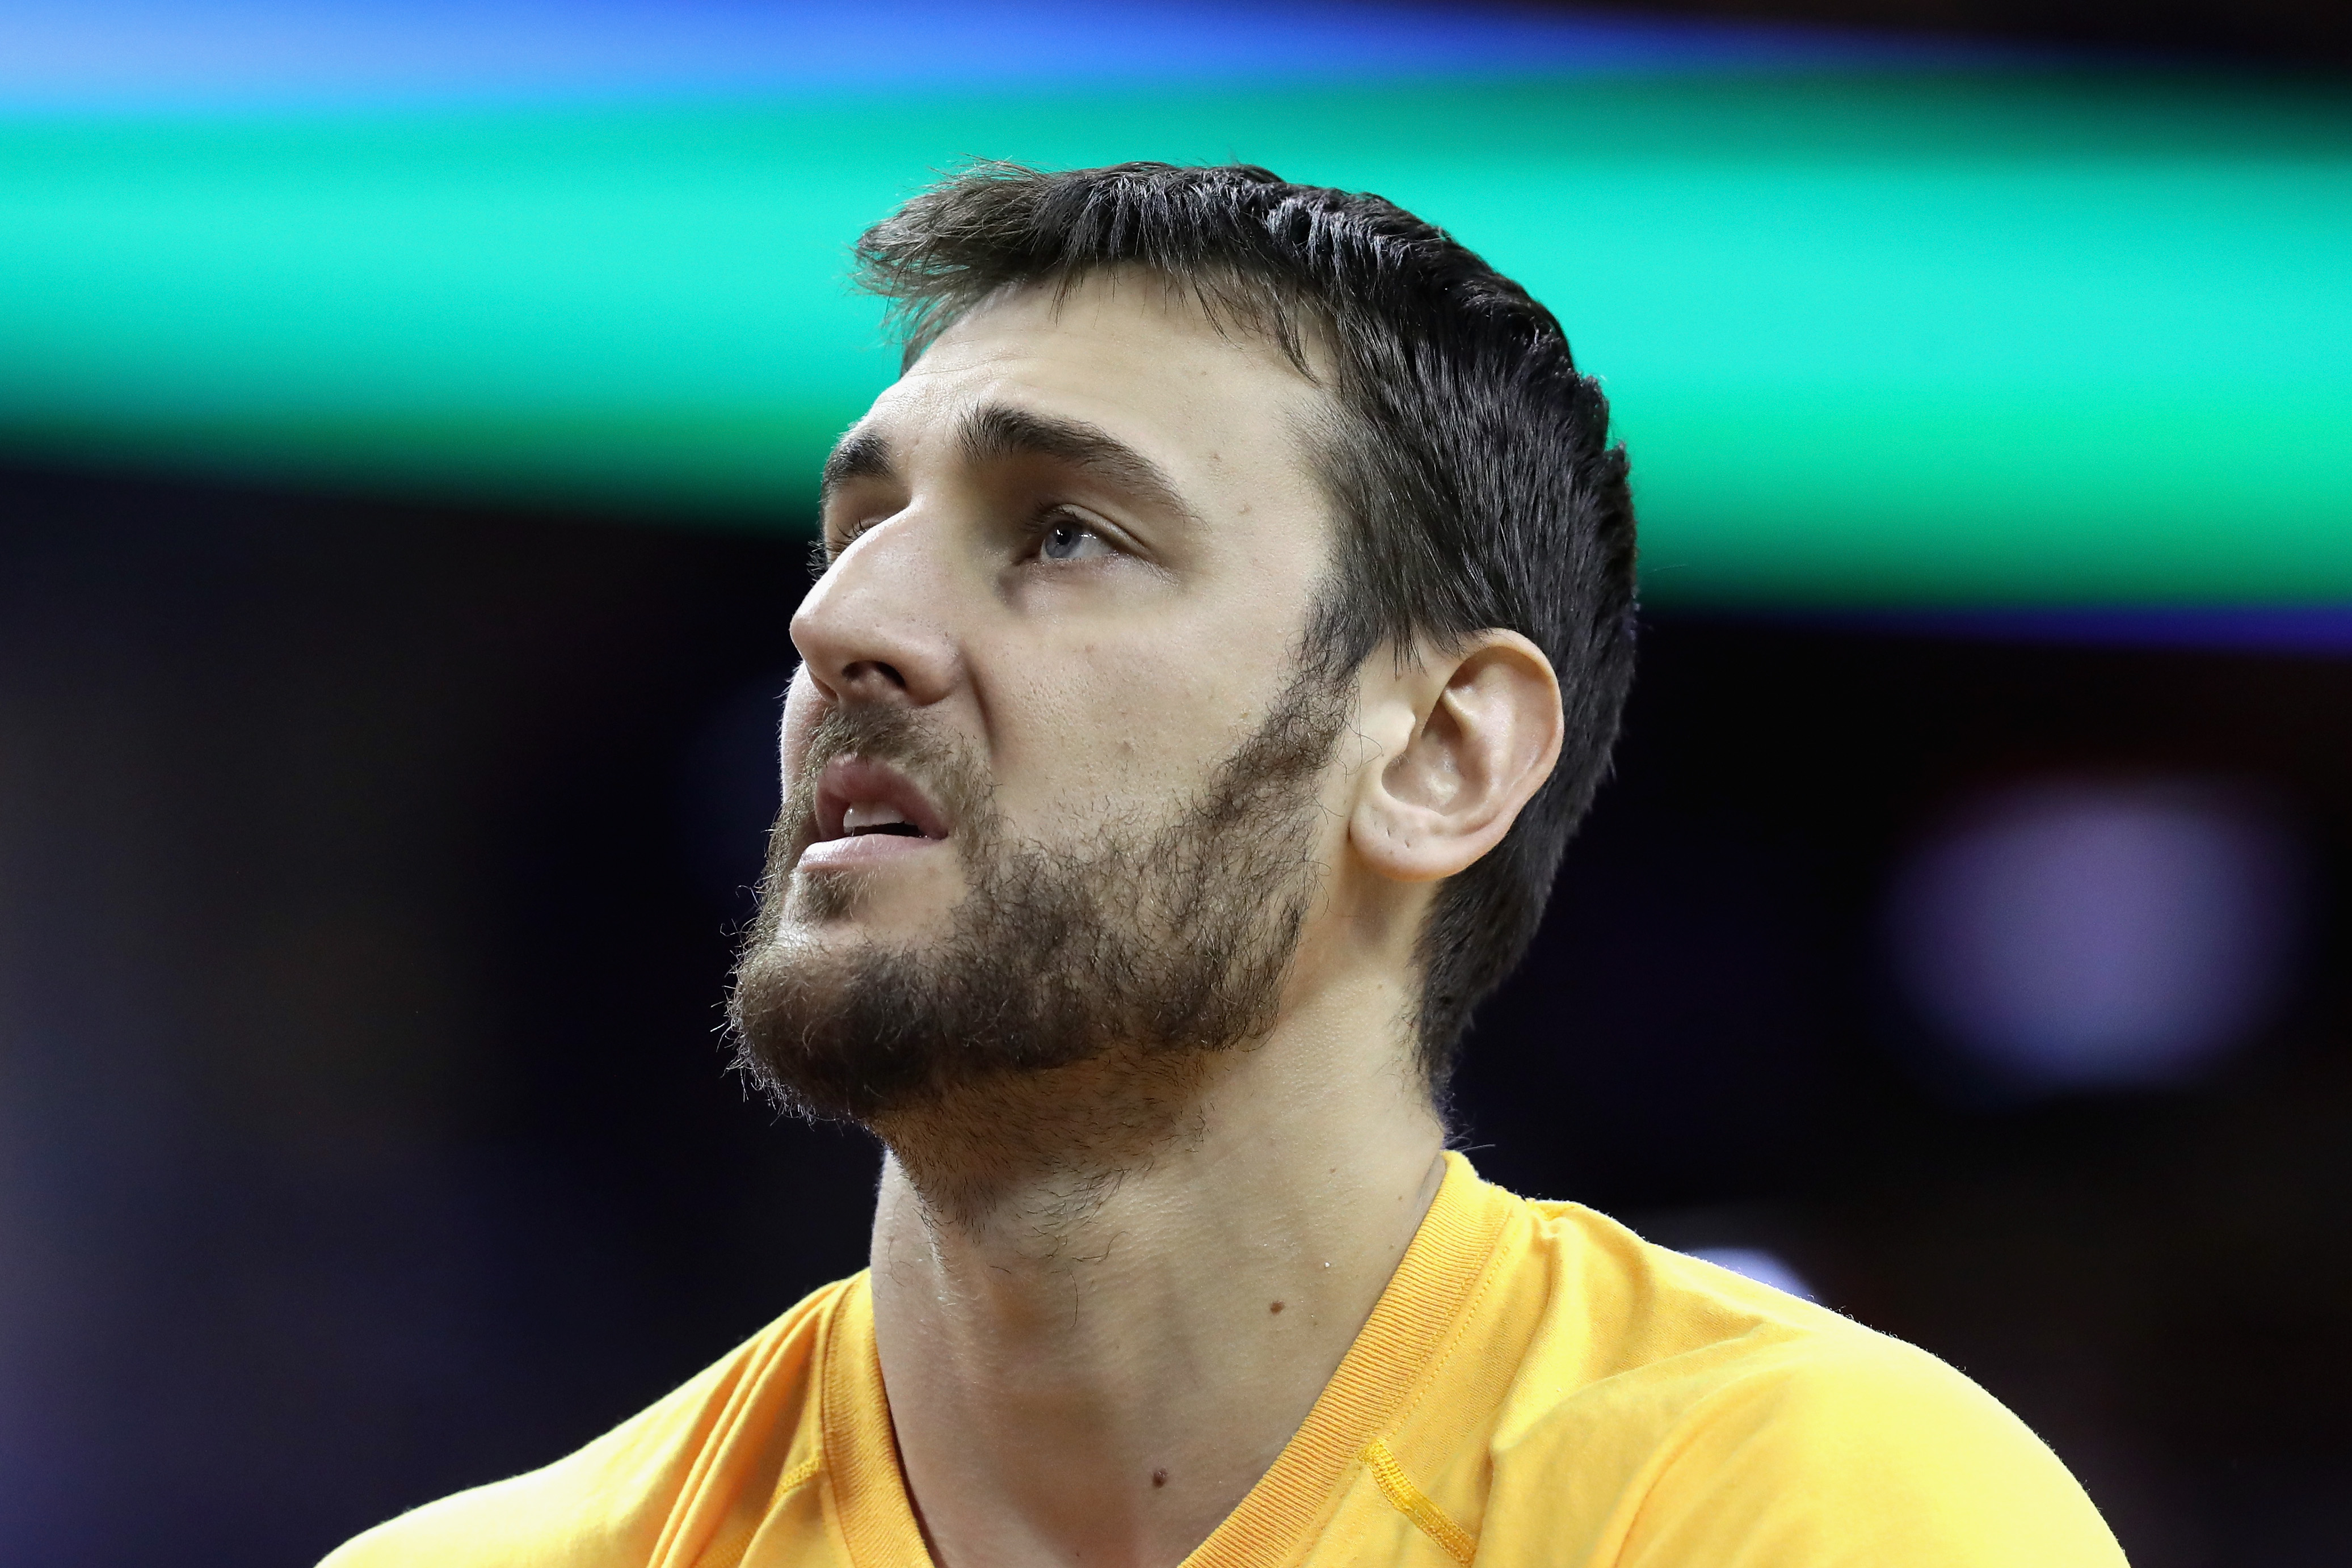 CLEVELAND, OH - JUNE 10: Andrew Bogut #12 of the Golden State Warriors warms up prior to Game 4 of the 2016 NBA Finals against the Cleveland Cavaliers at Quicken Loans Arena on June 10, 2016 in Cleveland, Ohio. NOTE TO USER: User expressly acknowledges and agrees that, by downloading and or using this photograph, User is consenting to the terms and conditions of the Getty Images License Agreement.   Ronald Martinez/Getty Images/AFP